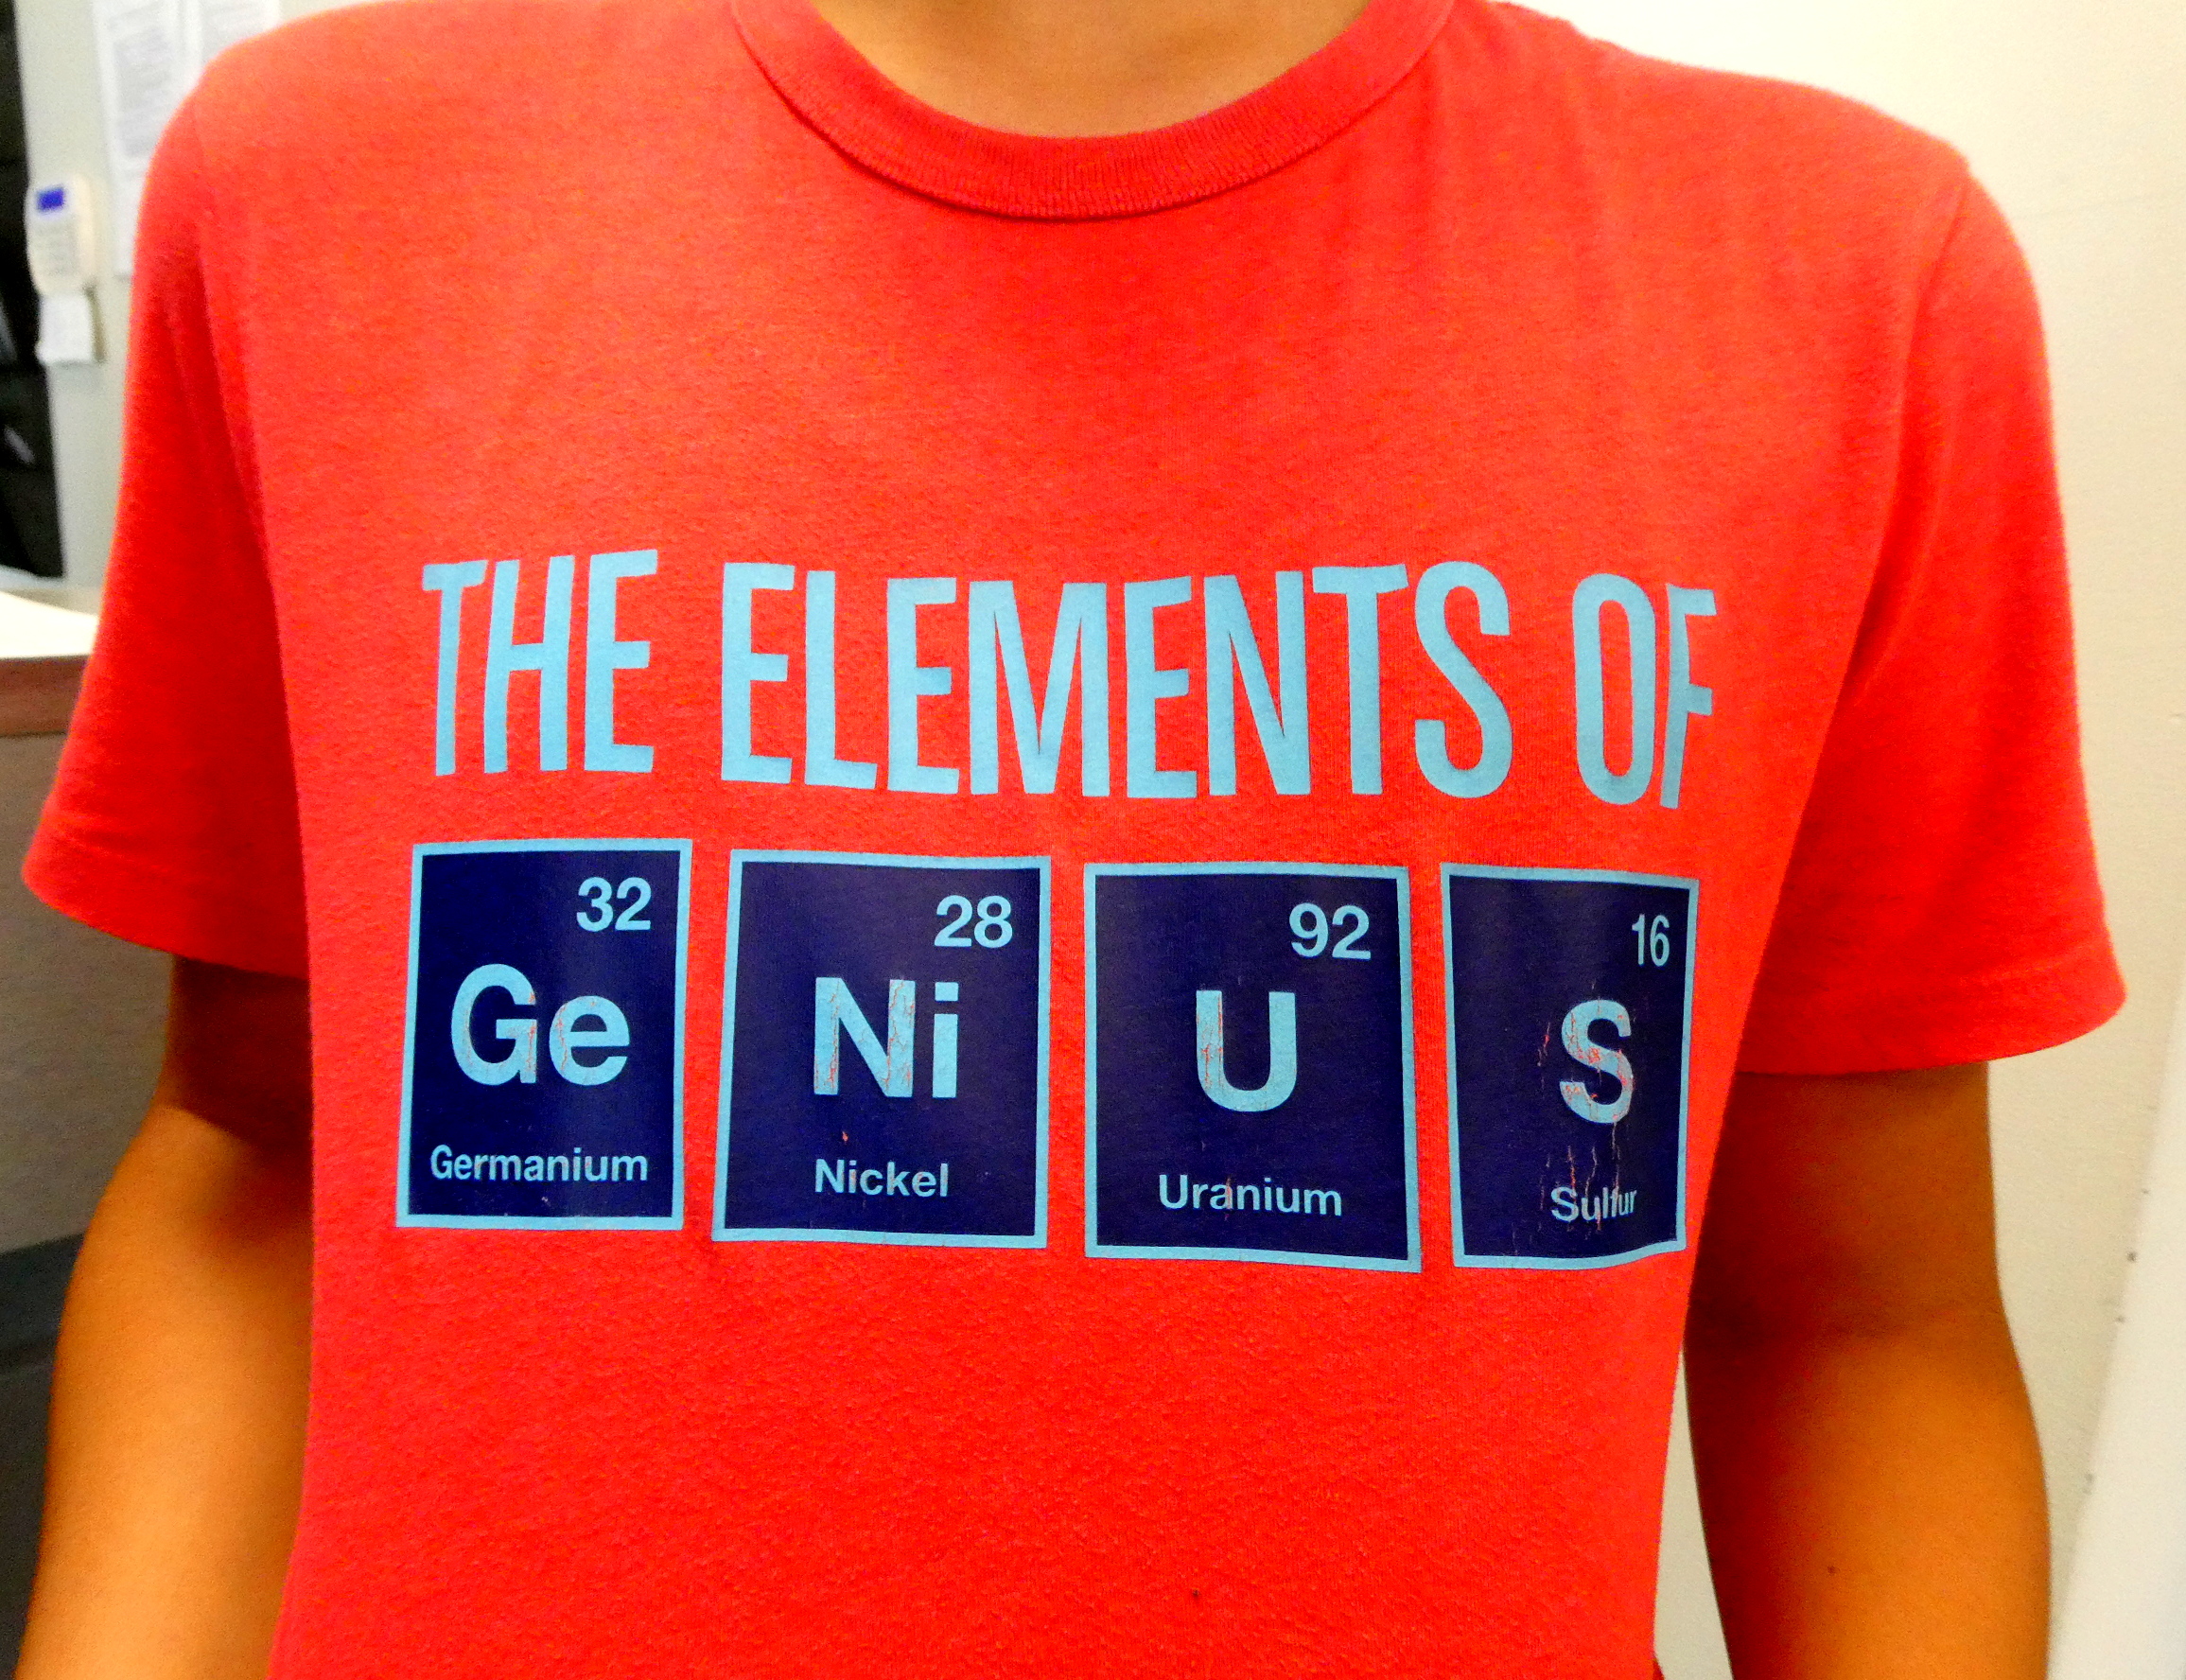 Elements of Genius on Boy's T-shirt, Physicians Diagnostic Imaging 3.20 pm 31 July 2023